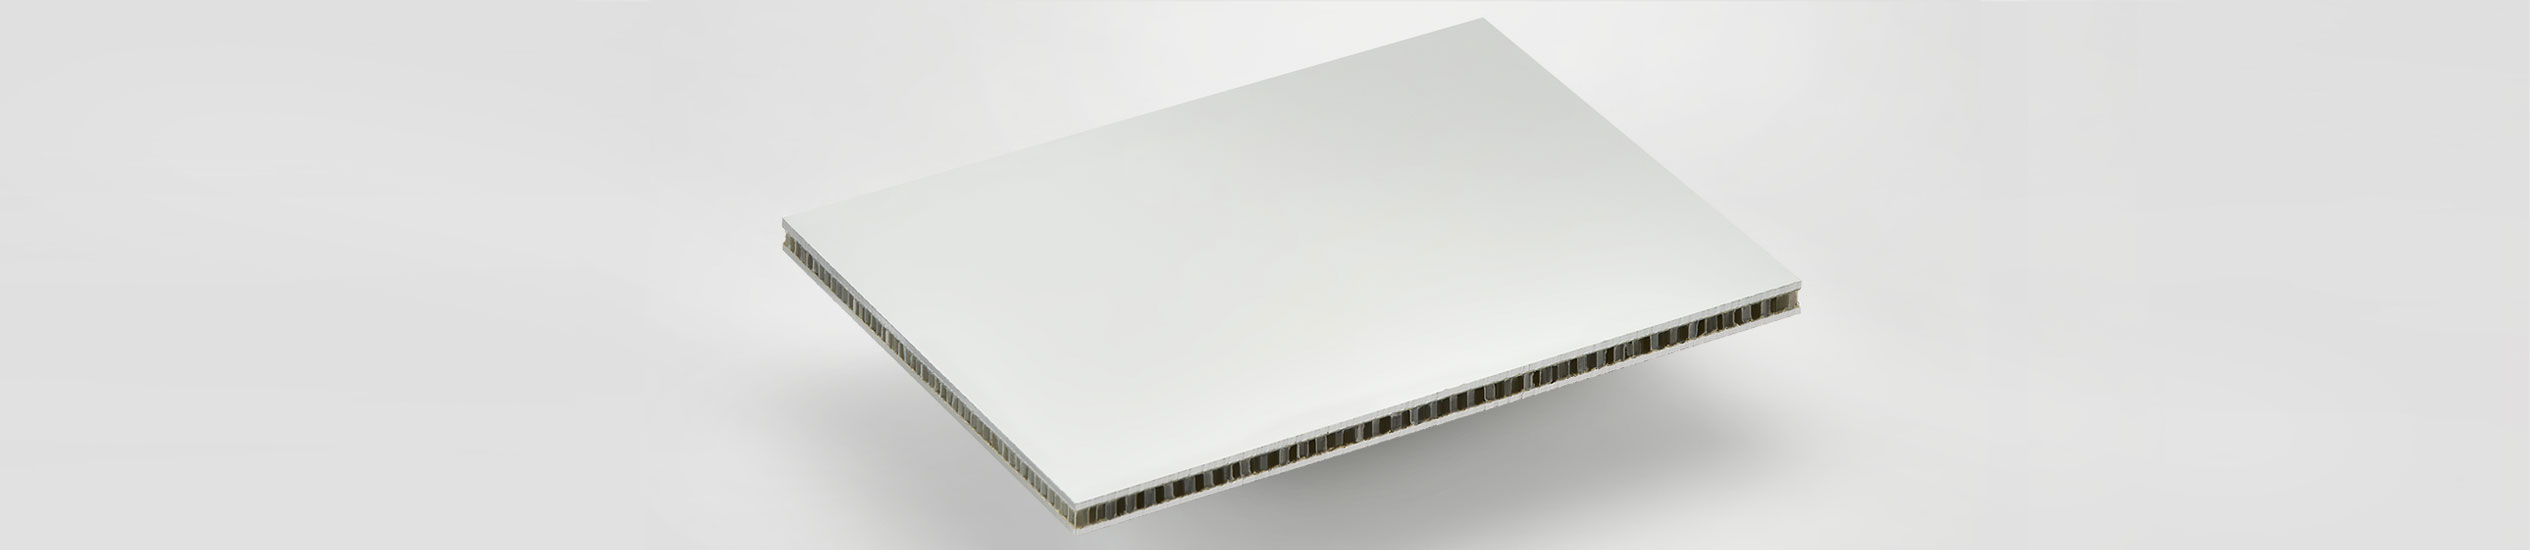 COMPOCEL® ALP is a lightweight honeycomb panel in aluminium and polypropylene for floors, interiors and furniture.